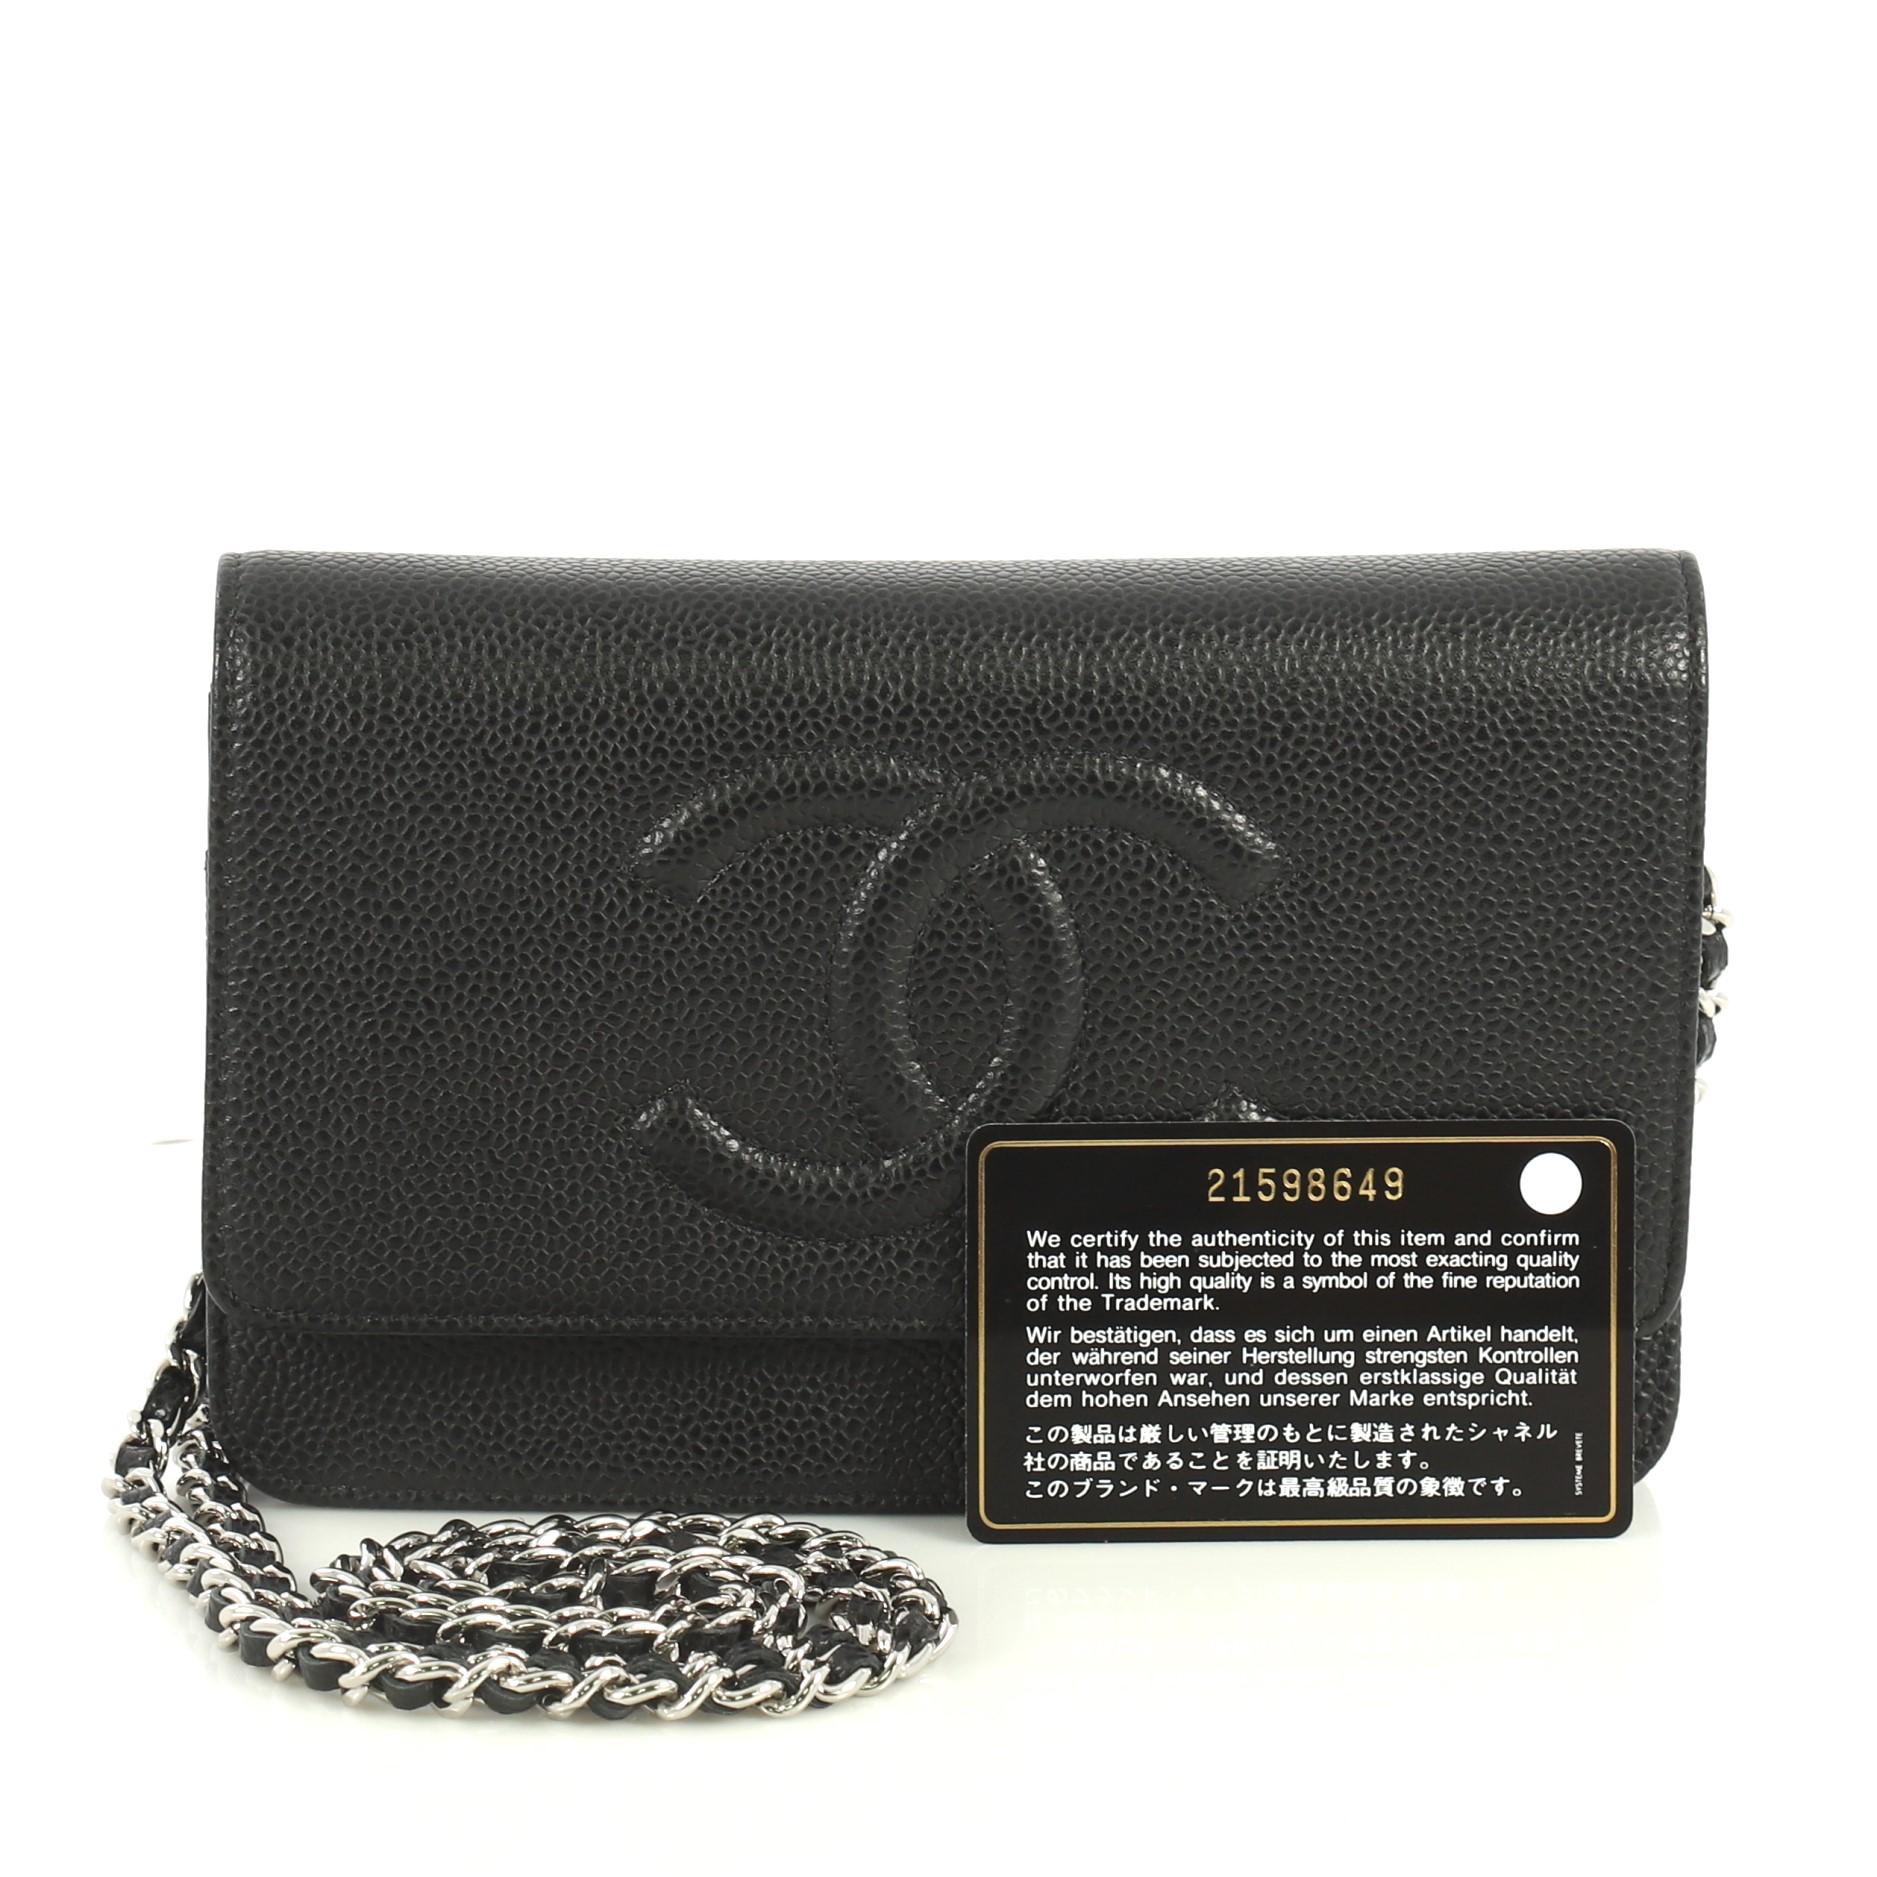 This Chanel Timeless Wallet on Chain Caviar, crafted in black caviar leather, features woven-in leather chain strap, interlocking CC logo stitched on front and silver-tone hardware. Its snap button closure opens to a black leather interior with